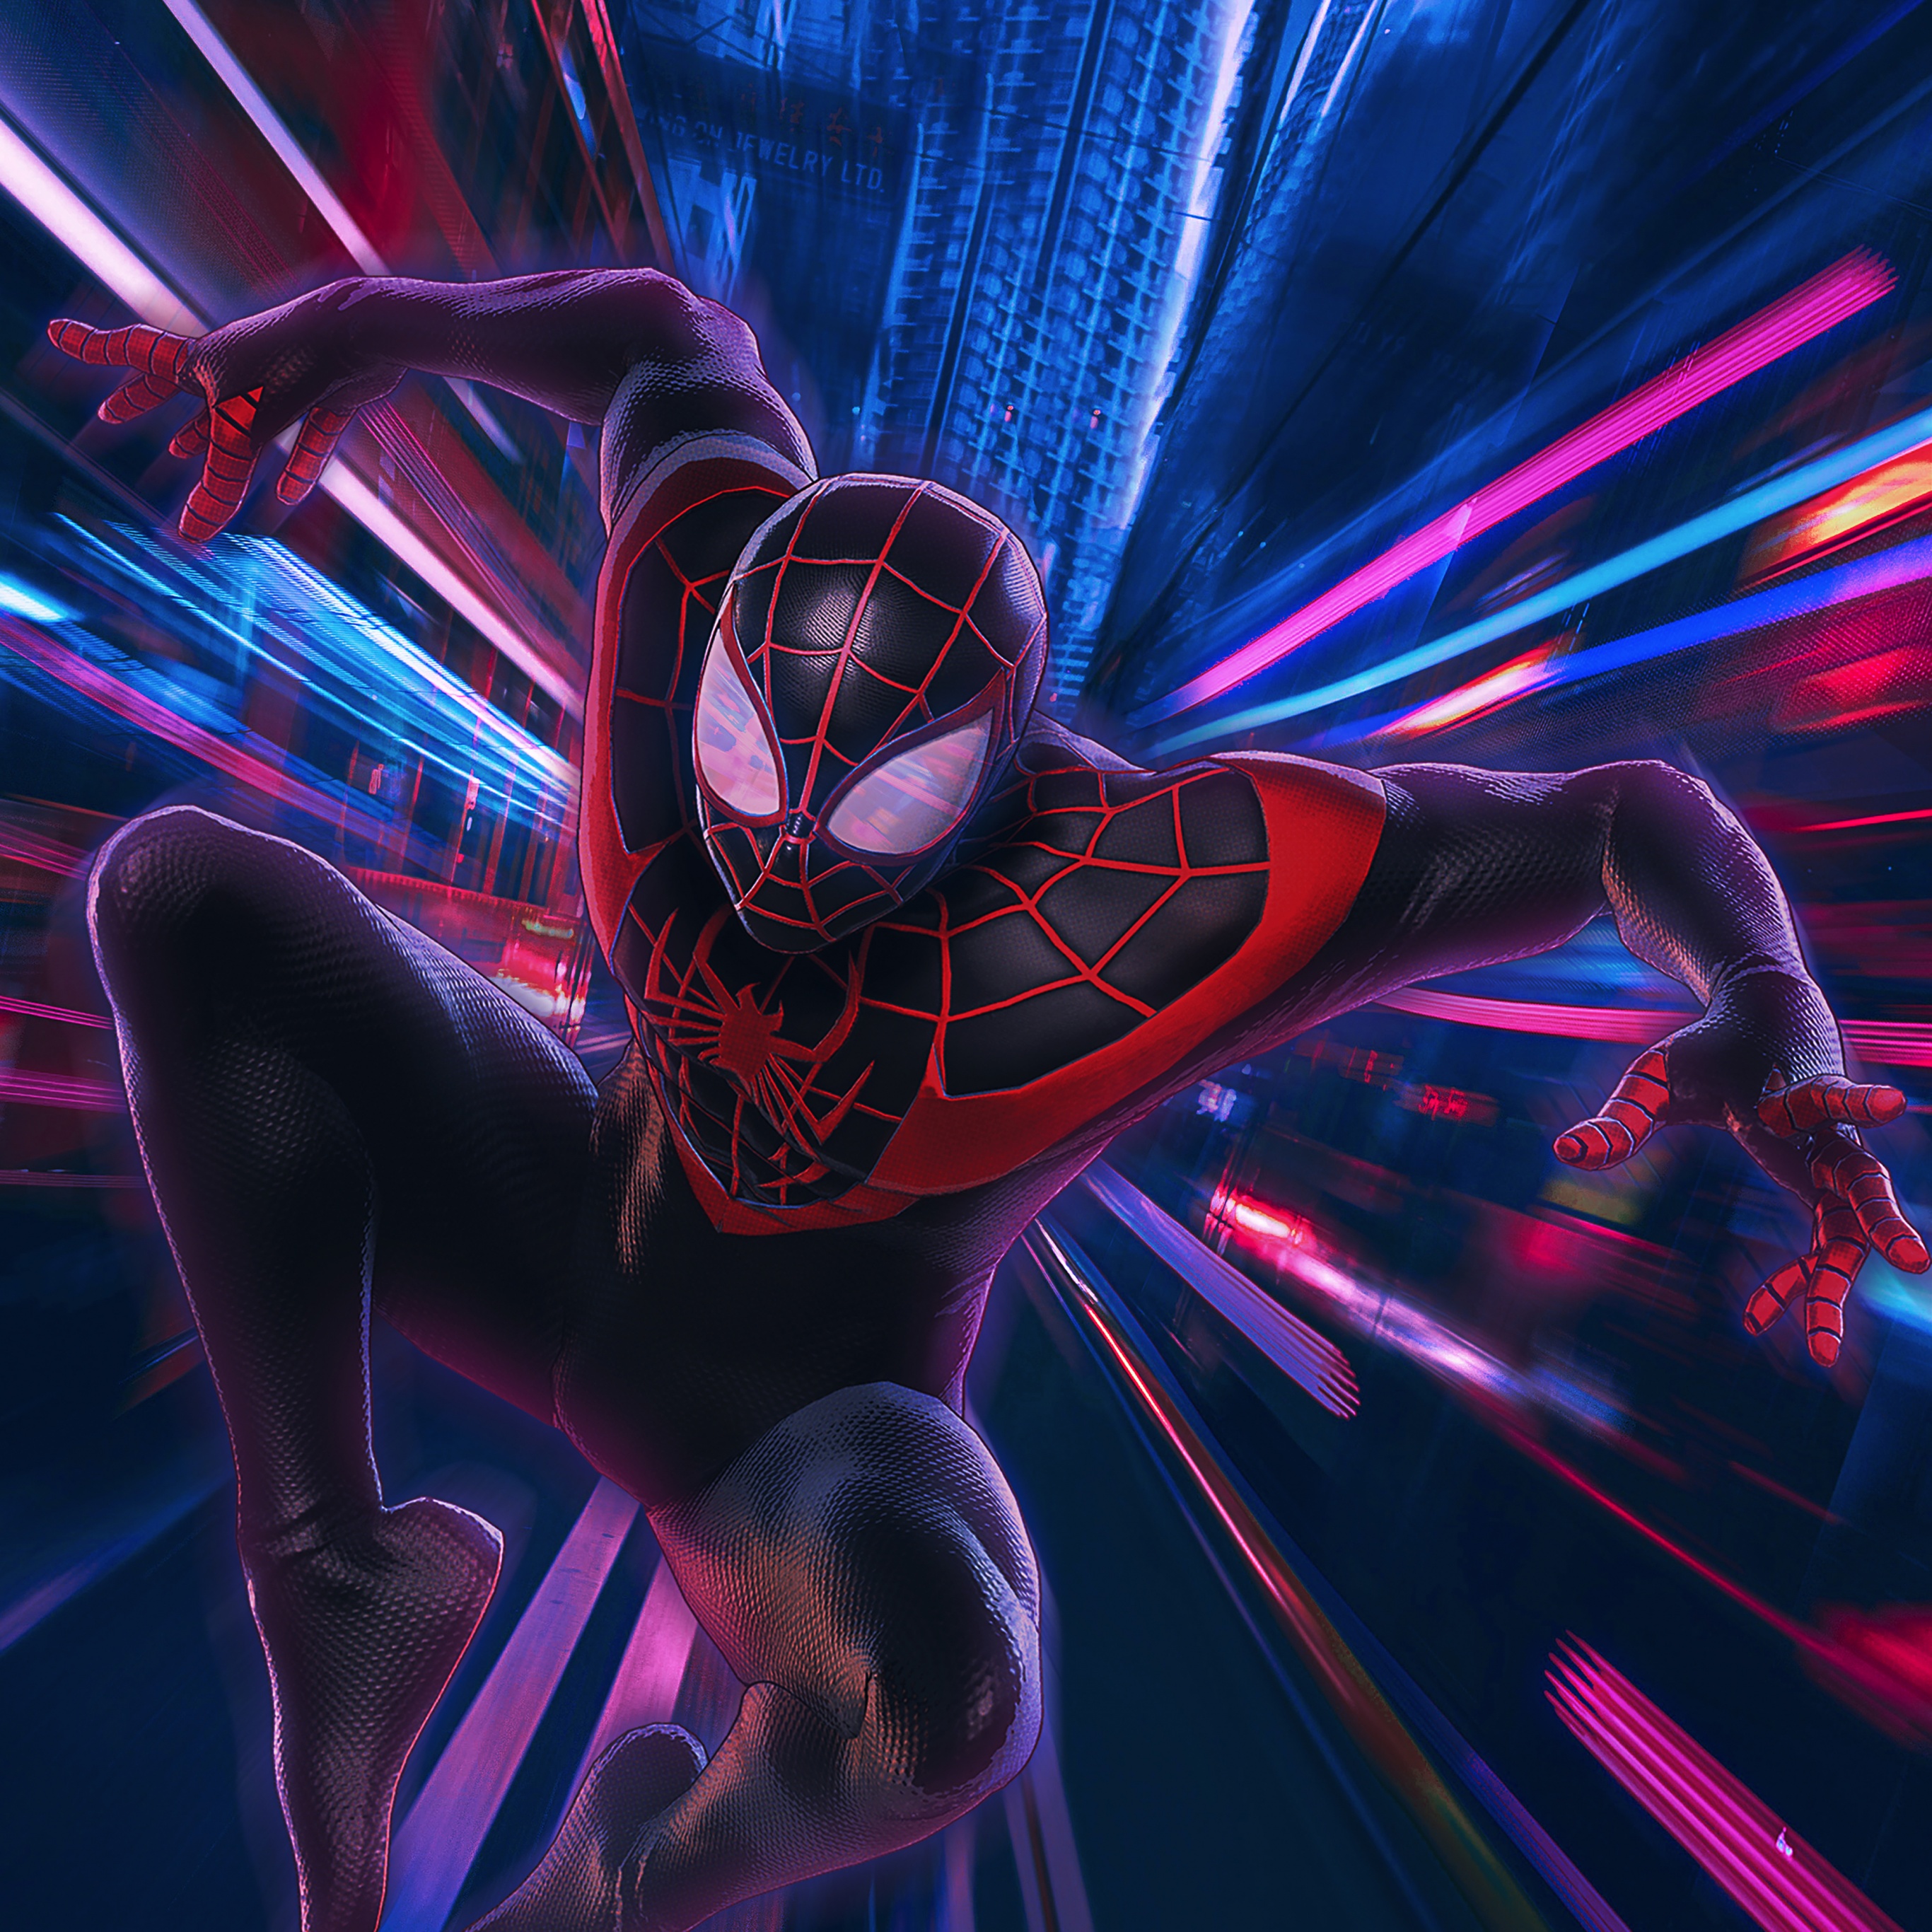 SpiderMan 4K wallpapers for your desktop or mobile screen free and easy to  download